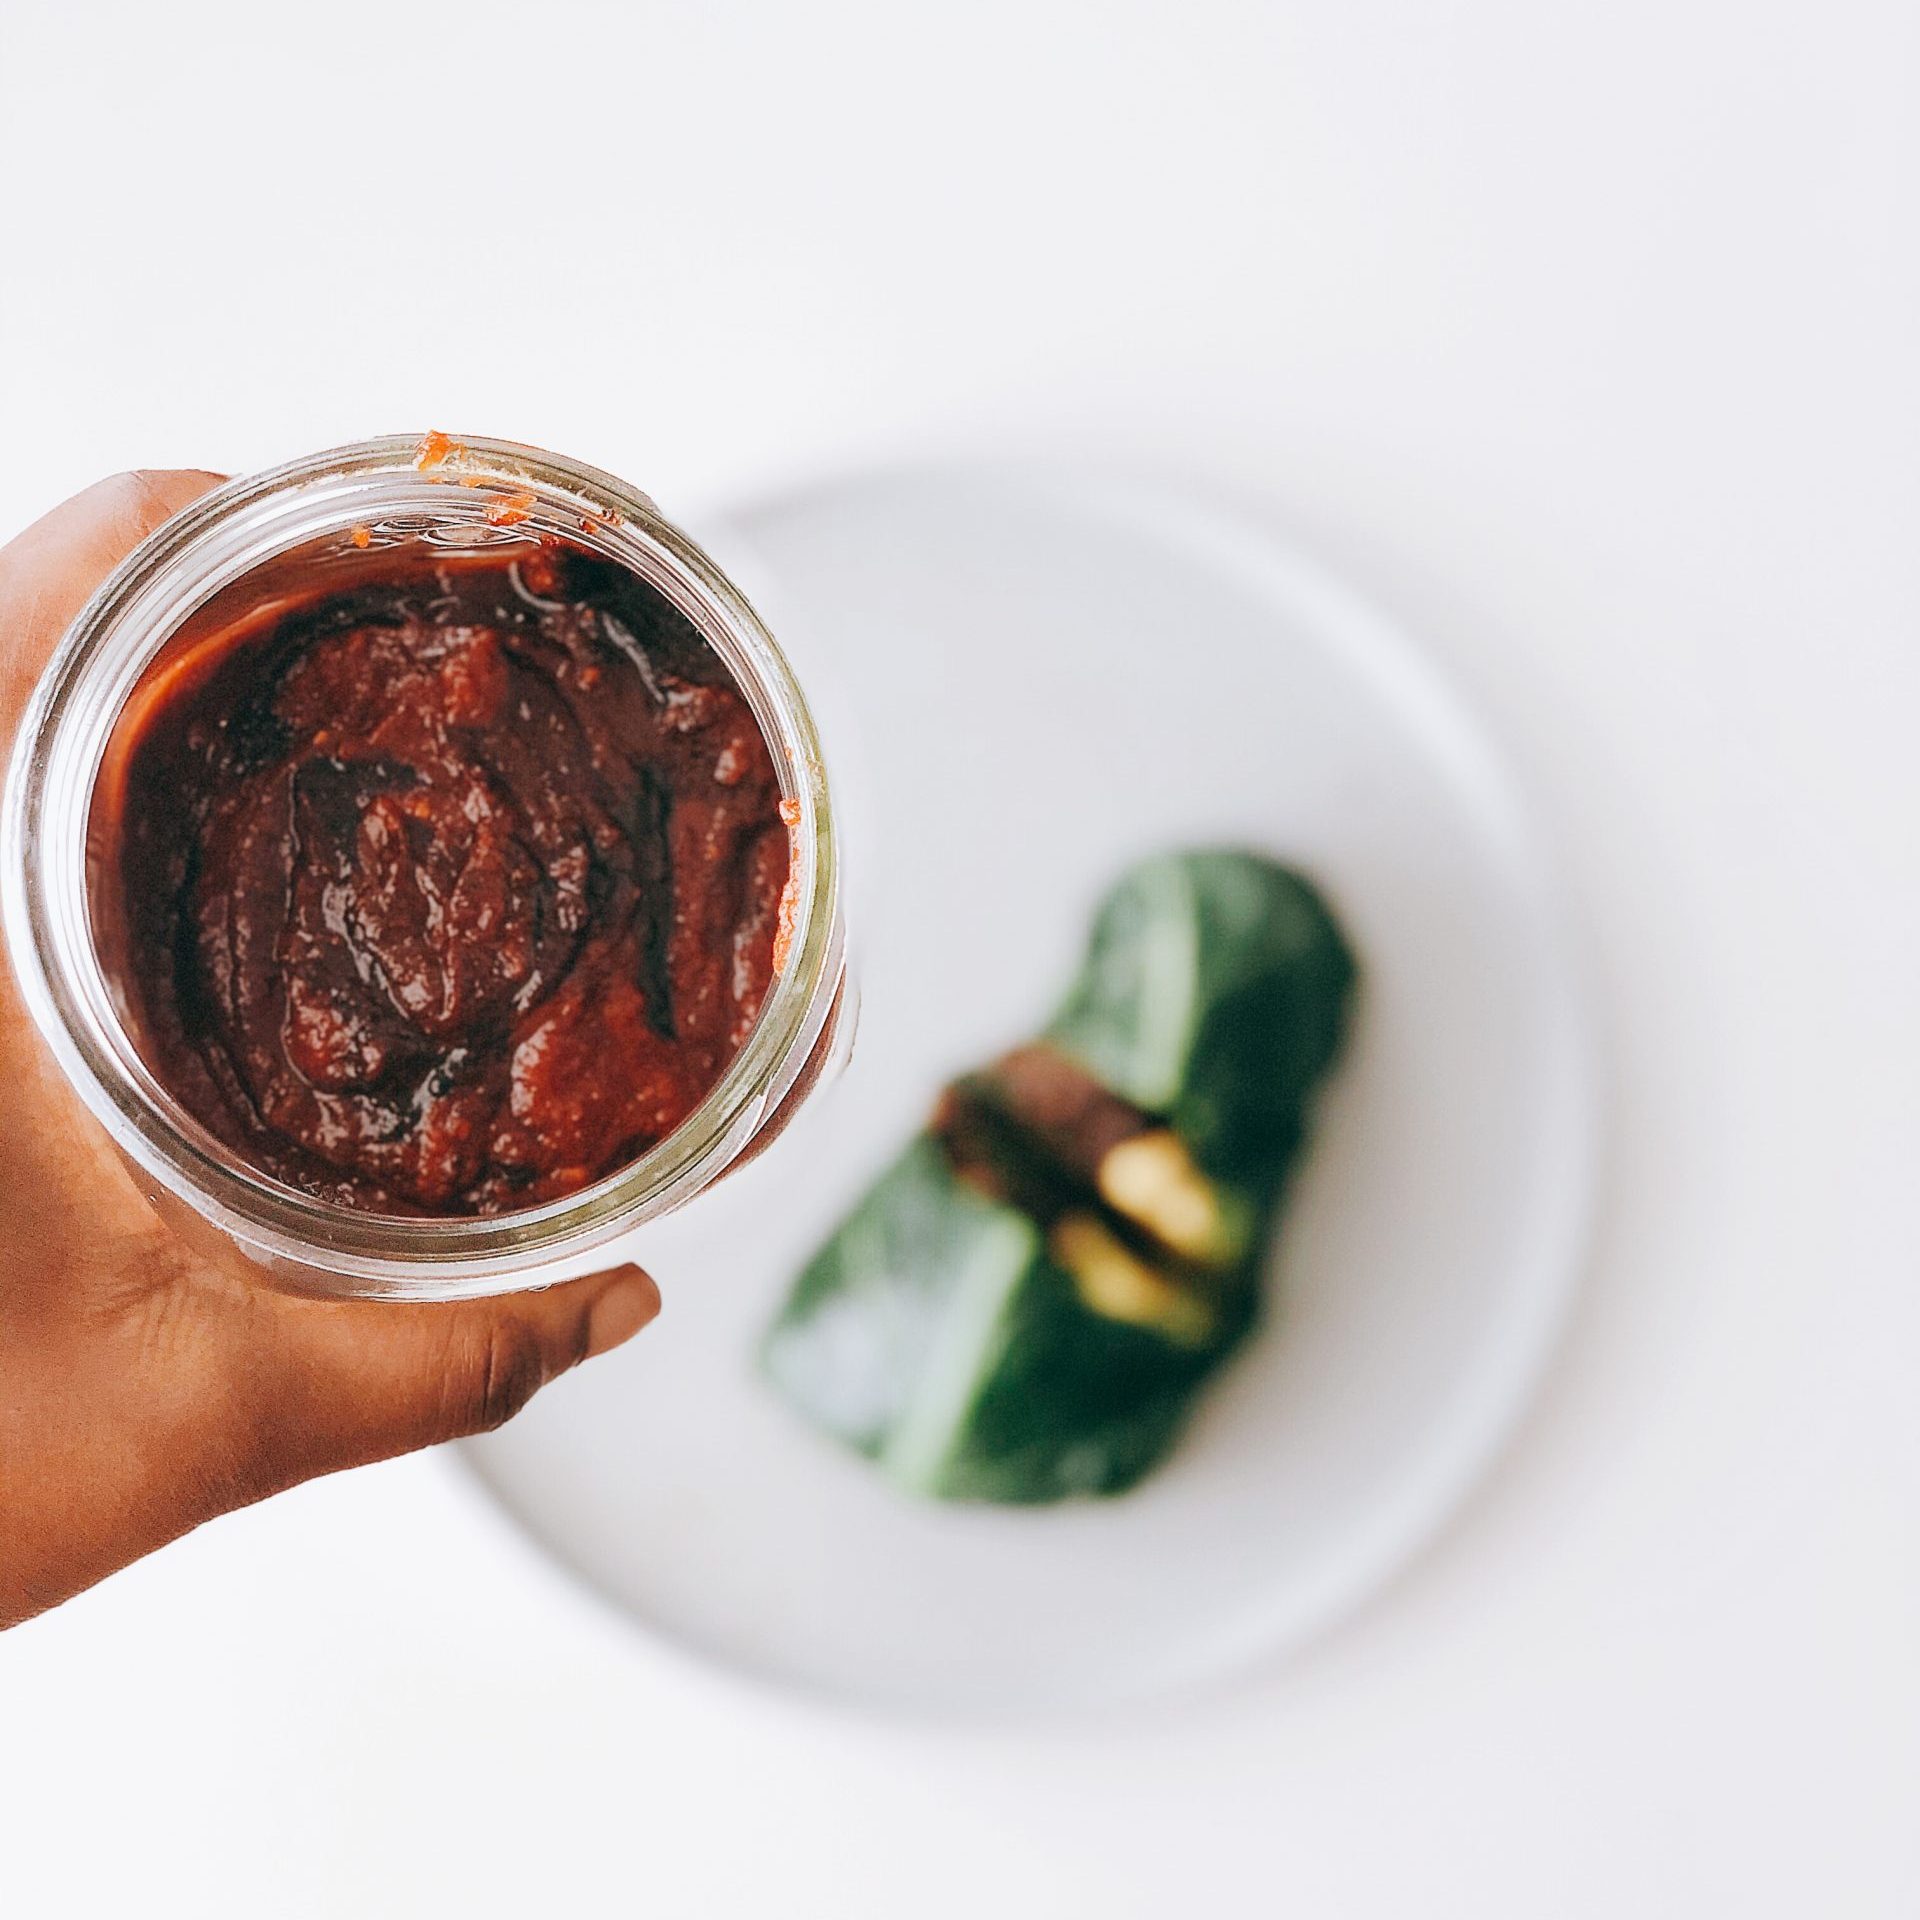 15-Minute Date Sweetened Barbecue Sauce